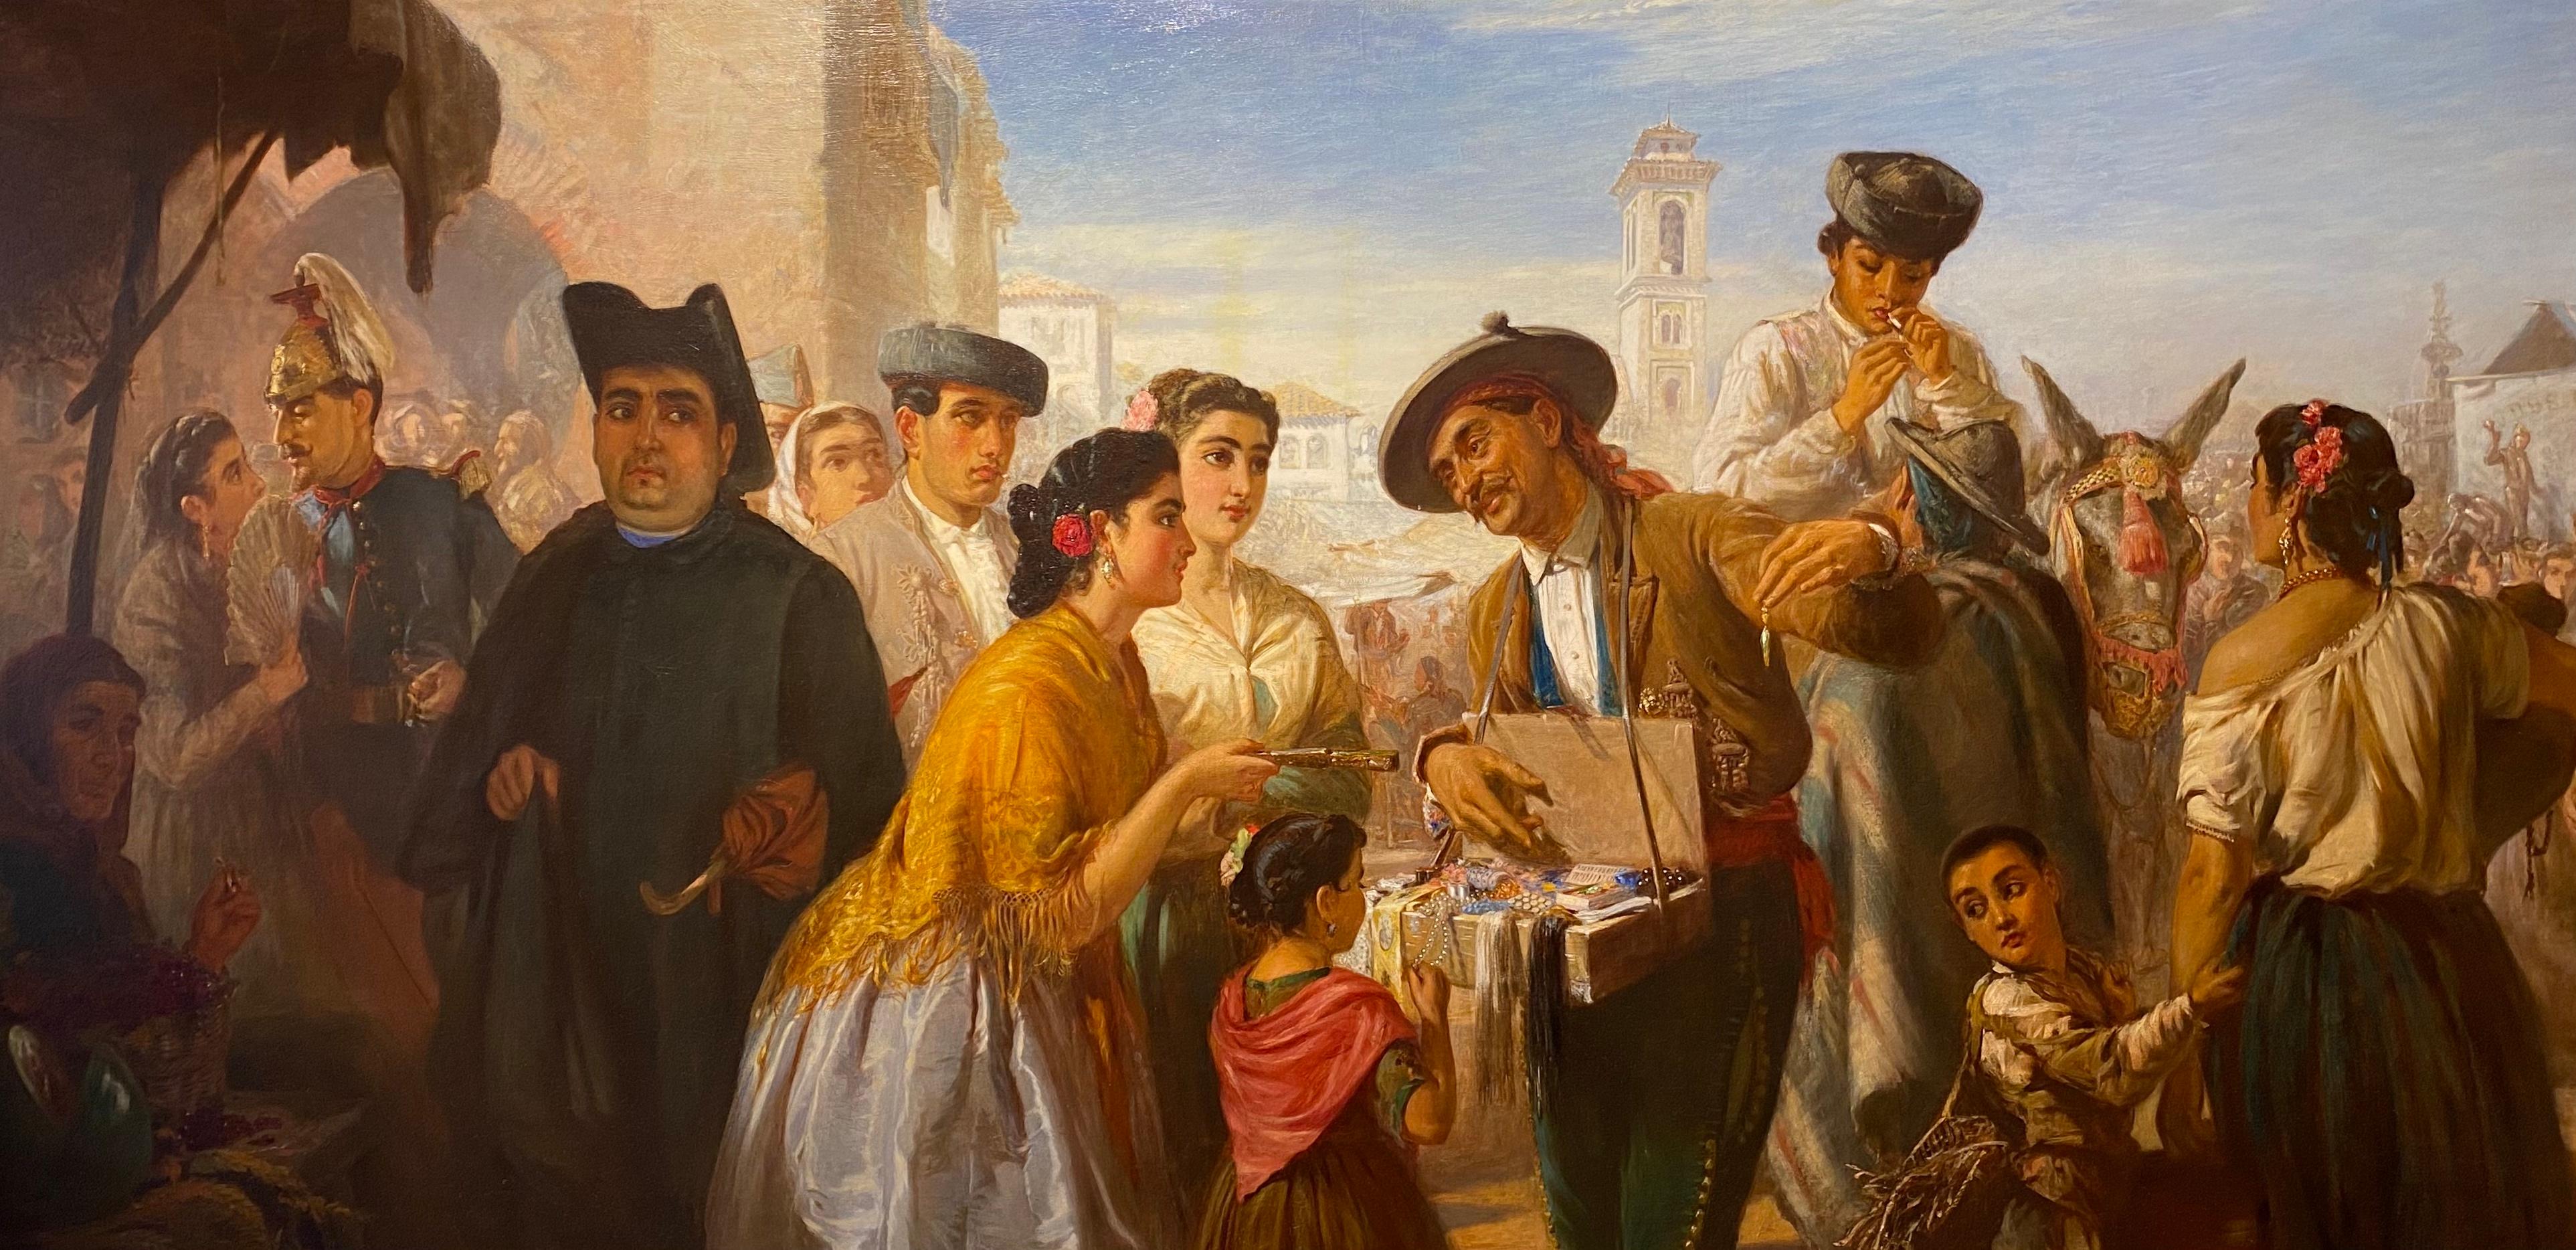 'La Feria' 19th Century large figurative scene of a middle eastern market - Painting by John Haynes Williams 